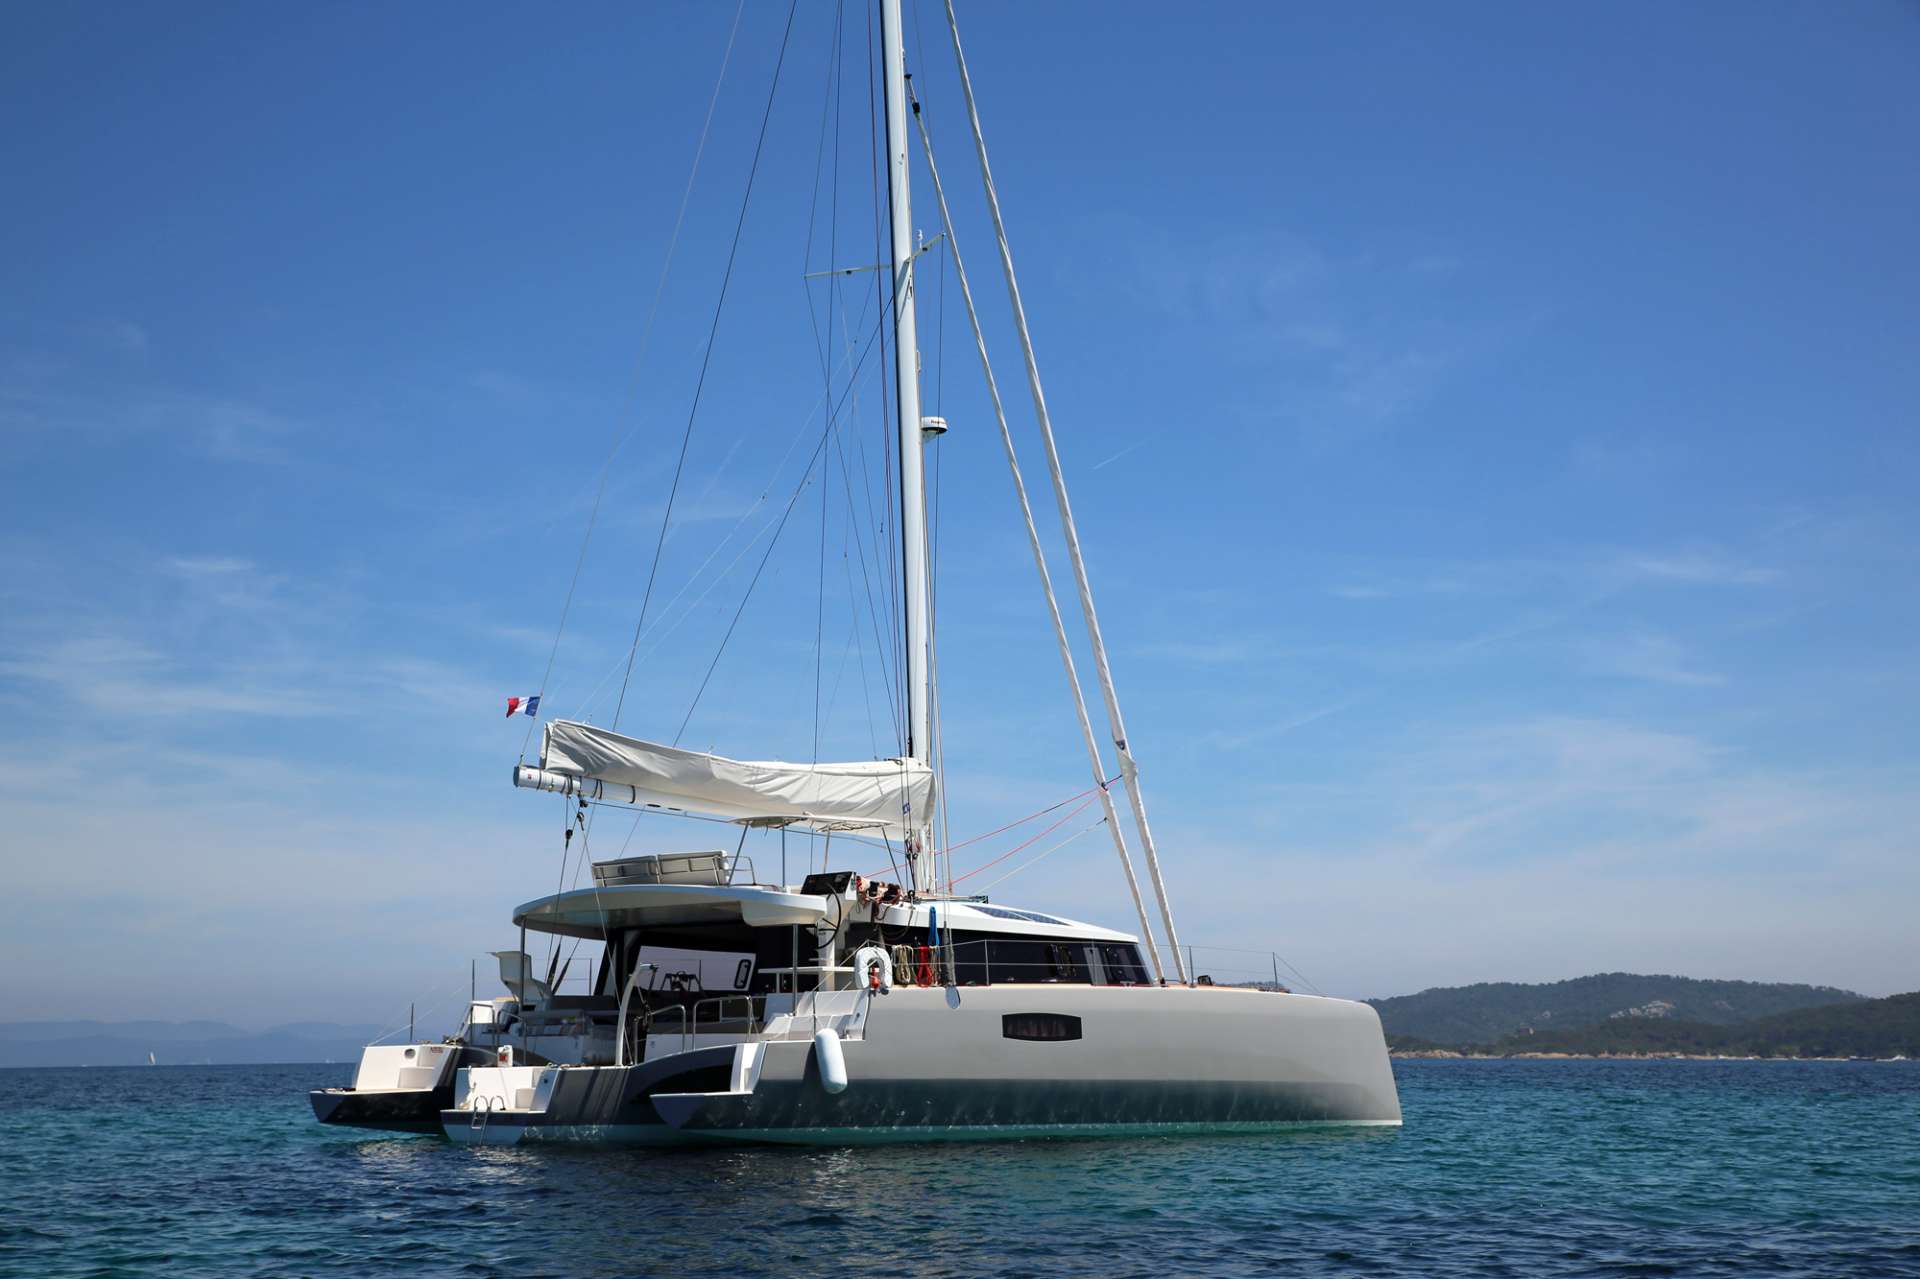 TRILOGY Yacht Charter - A Peaceful Place to Rest